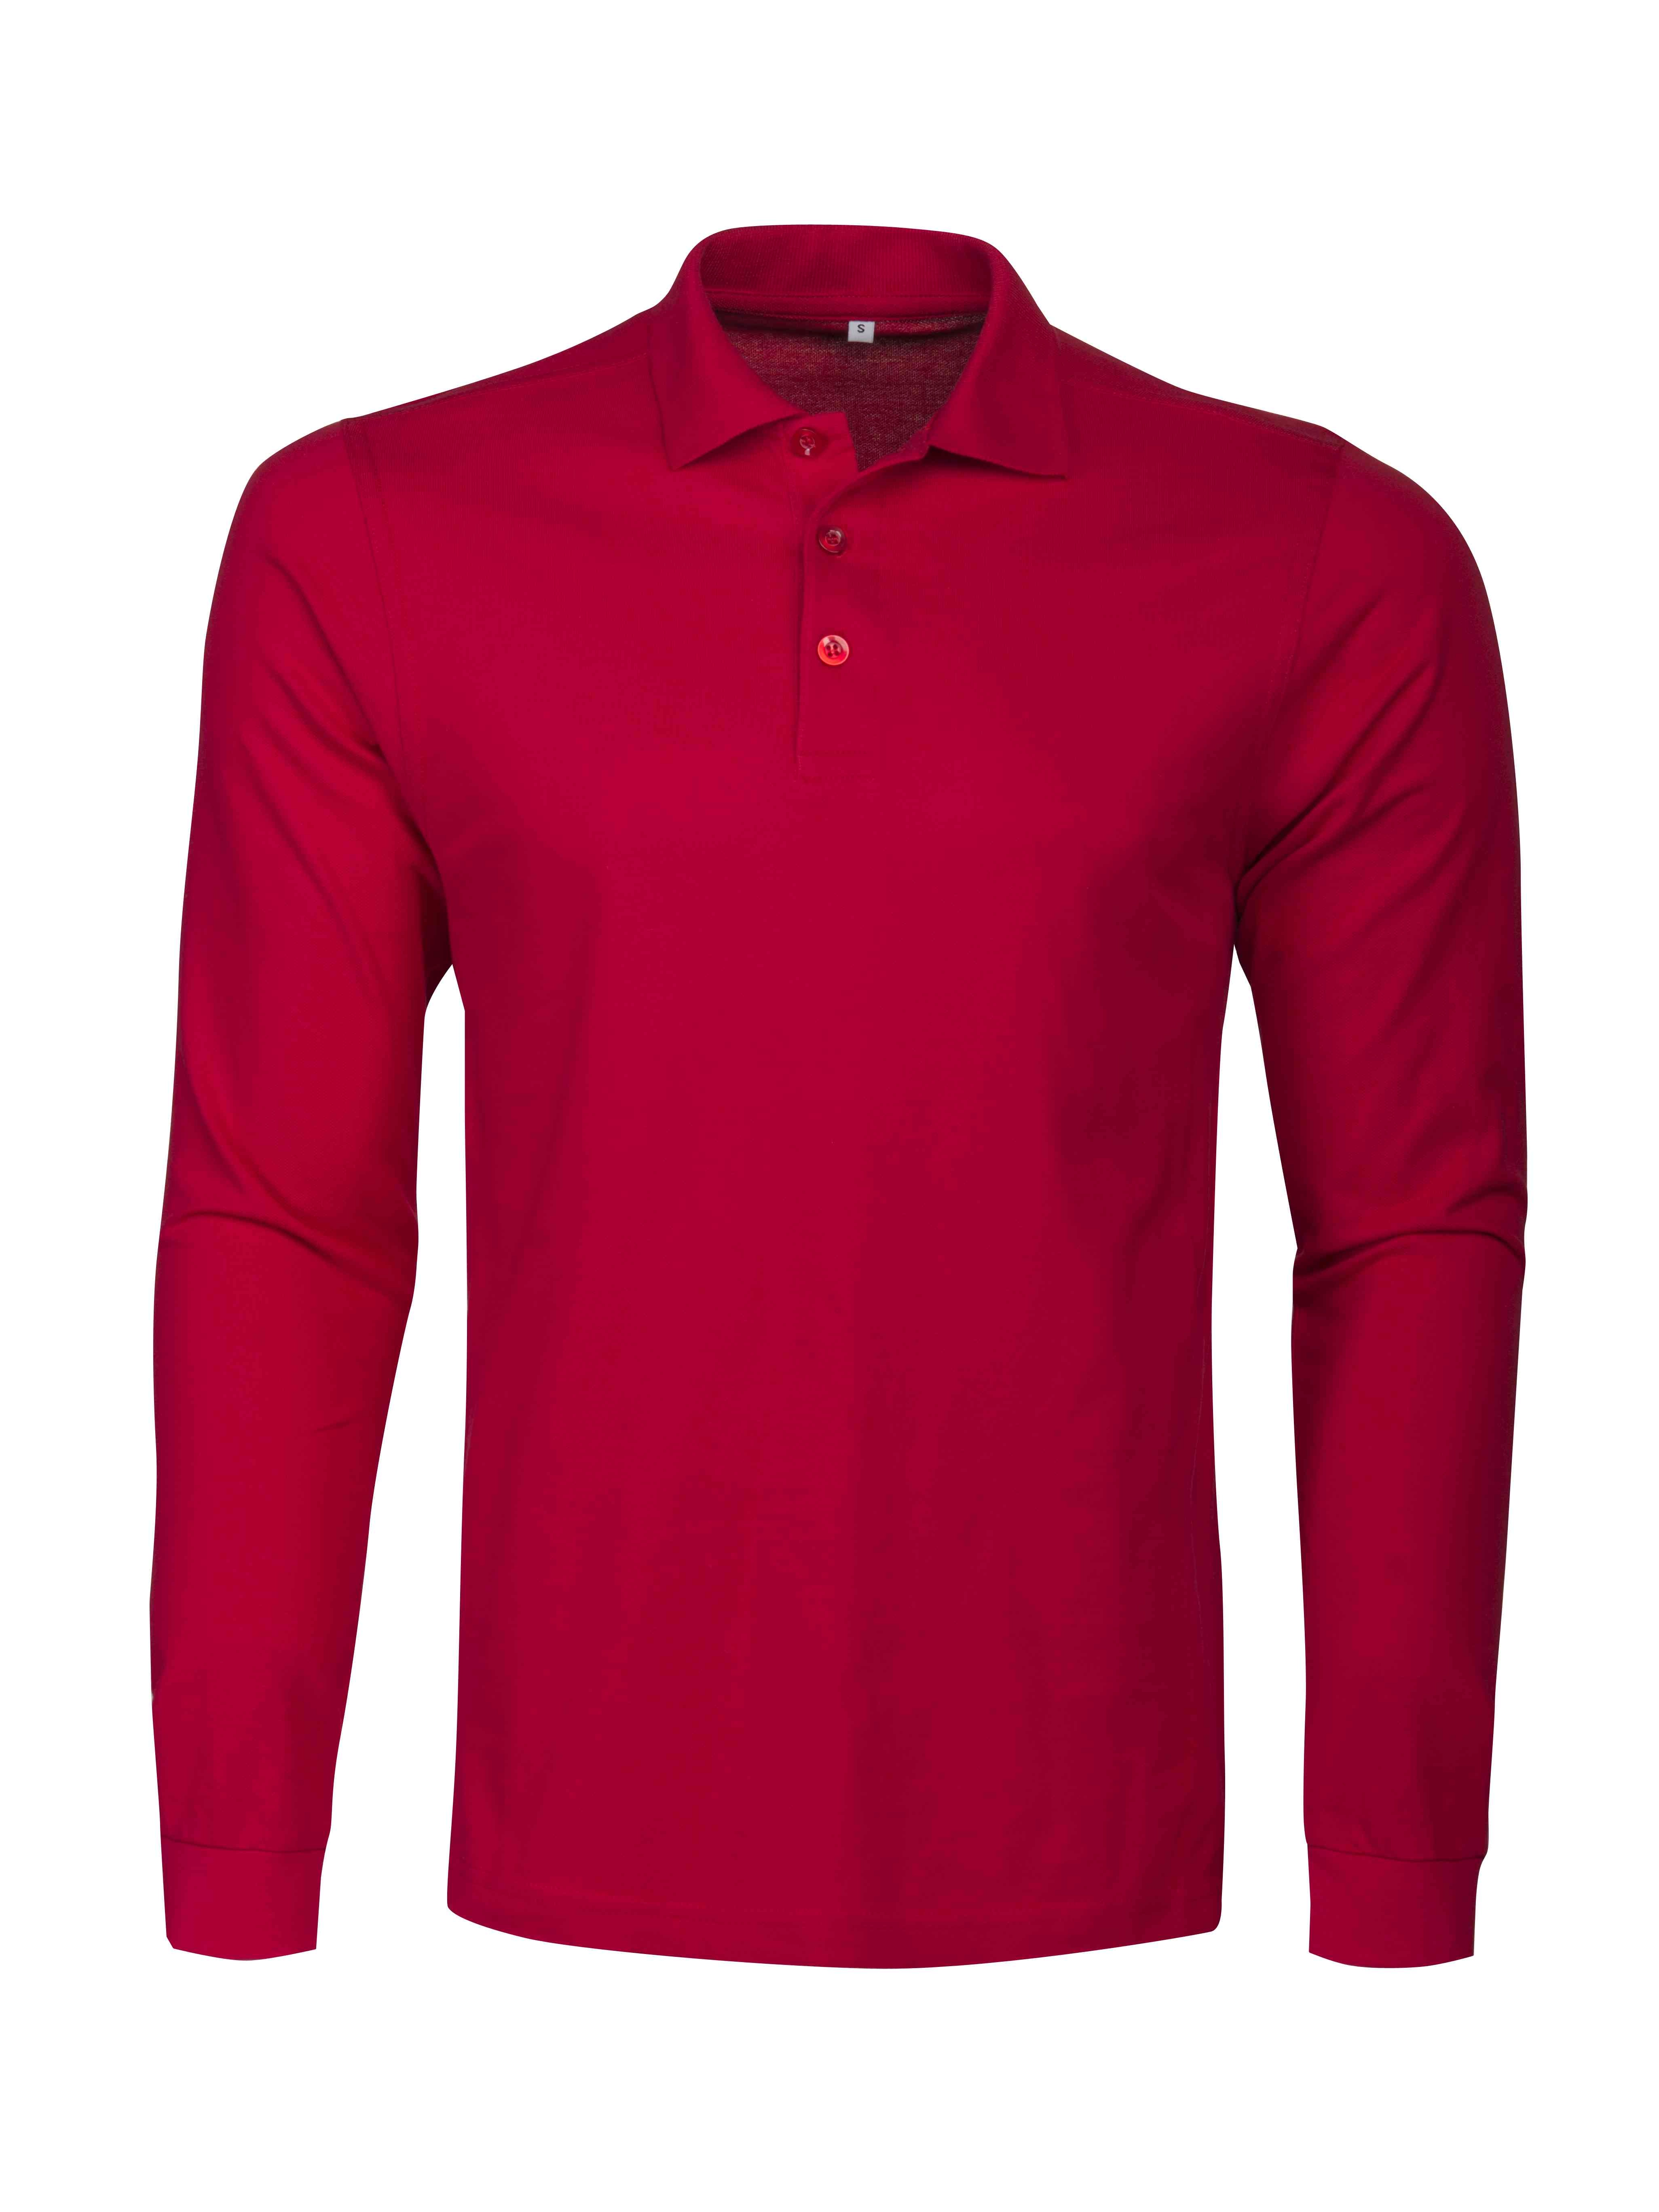 SURF POLO RSX L/S RED PE-2265011-400-4